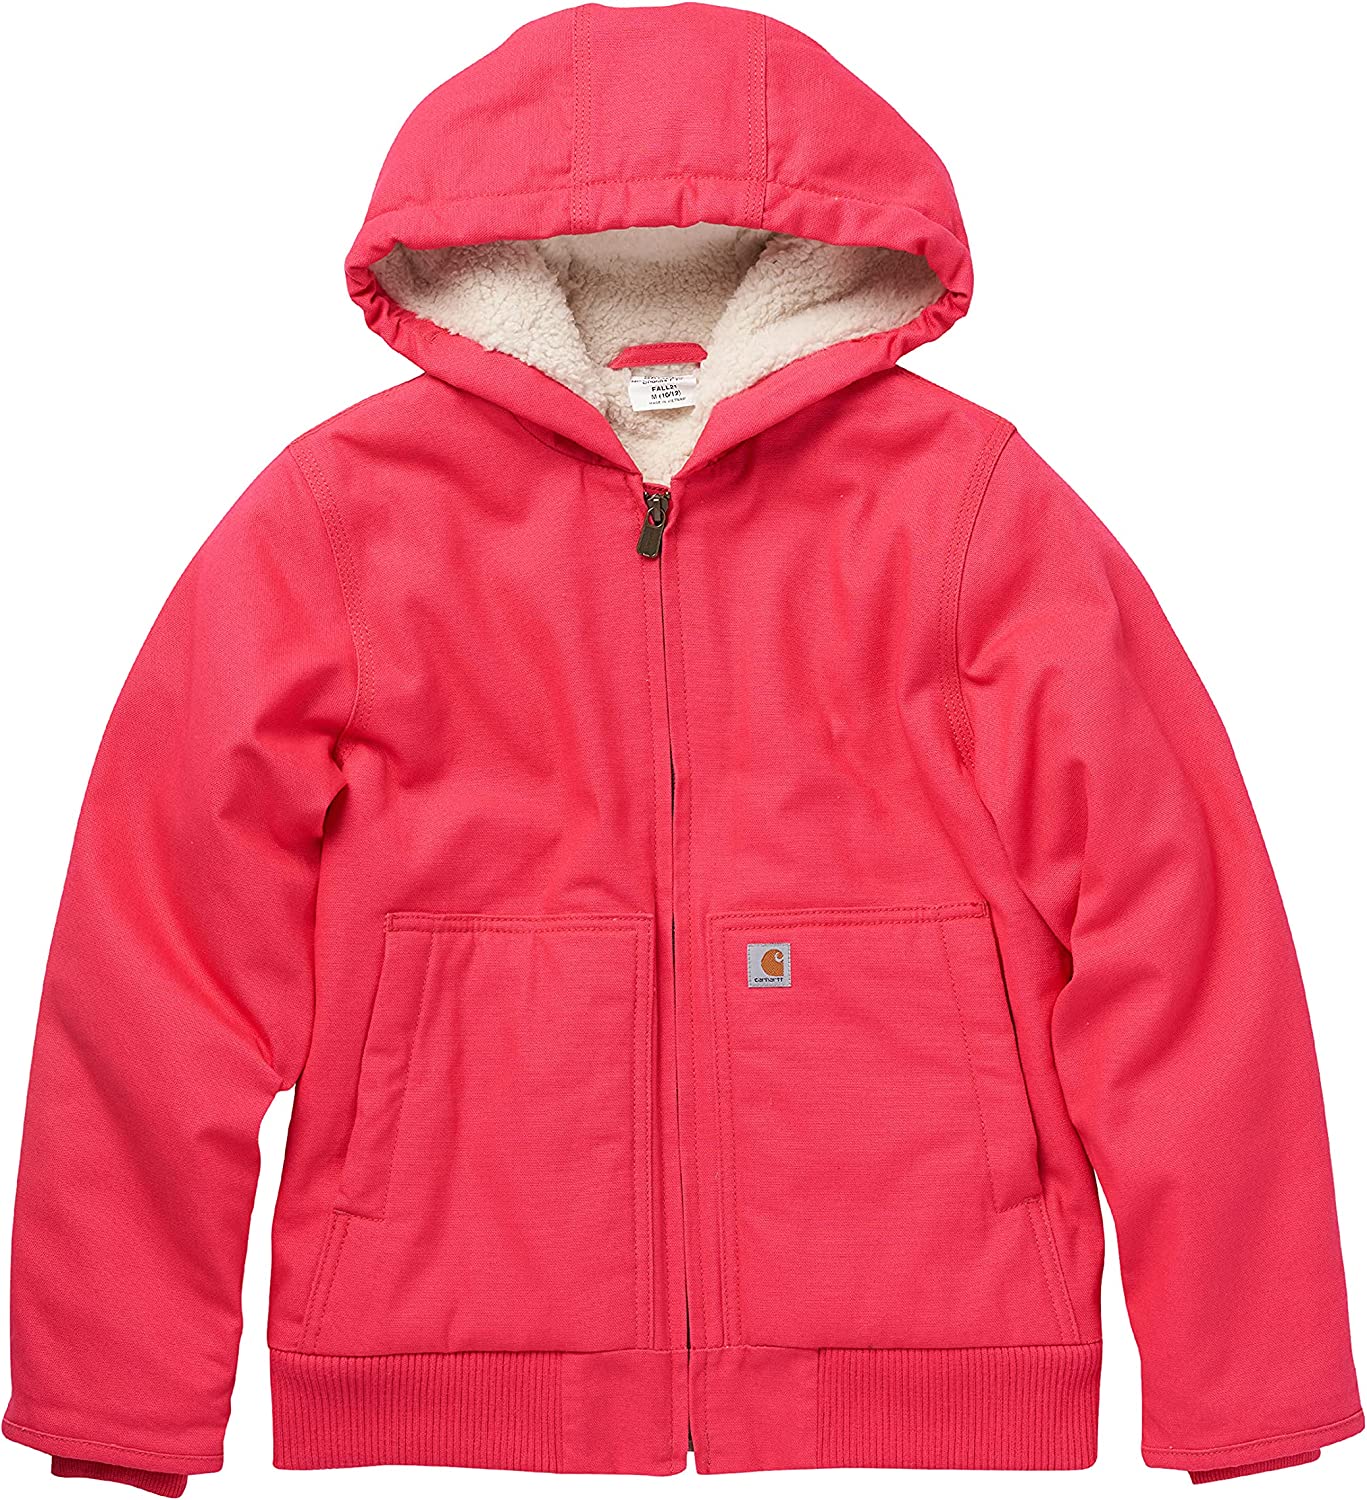 3 Pink Carhartt Jackets: Ready to Brave the Elements...